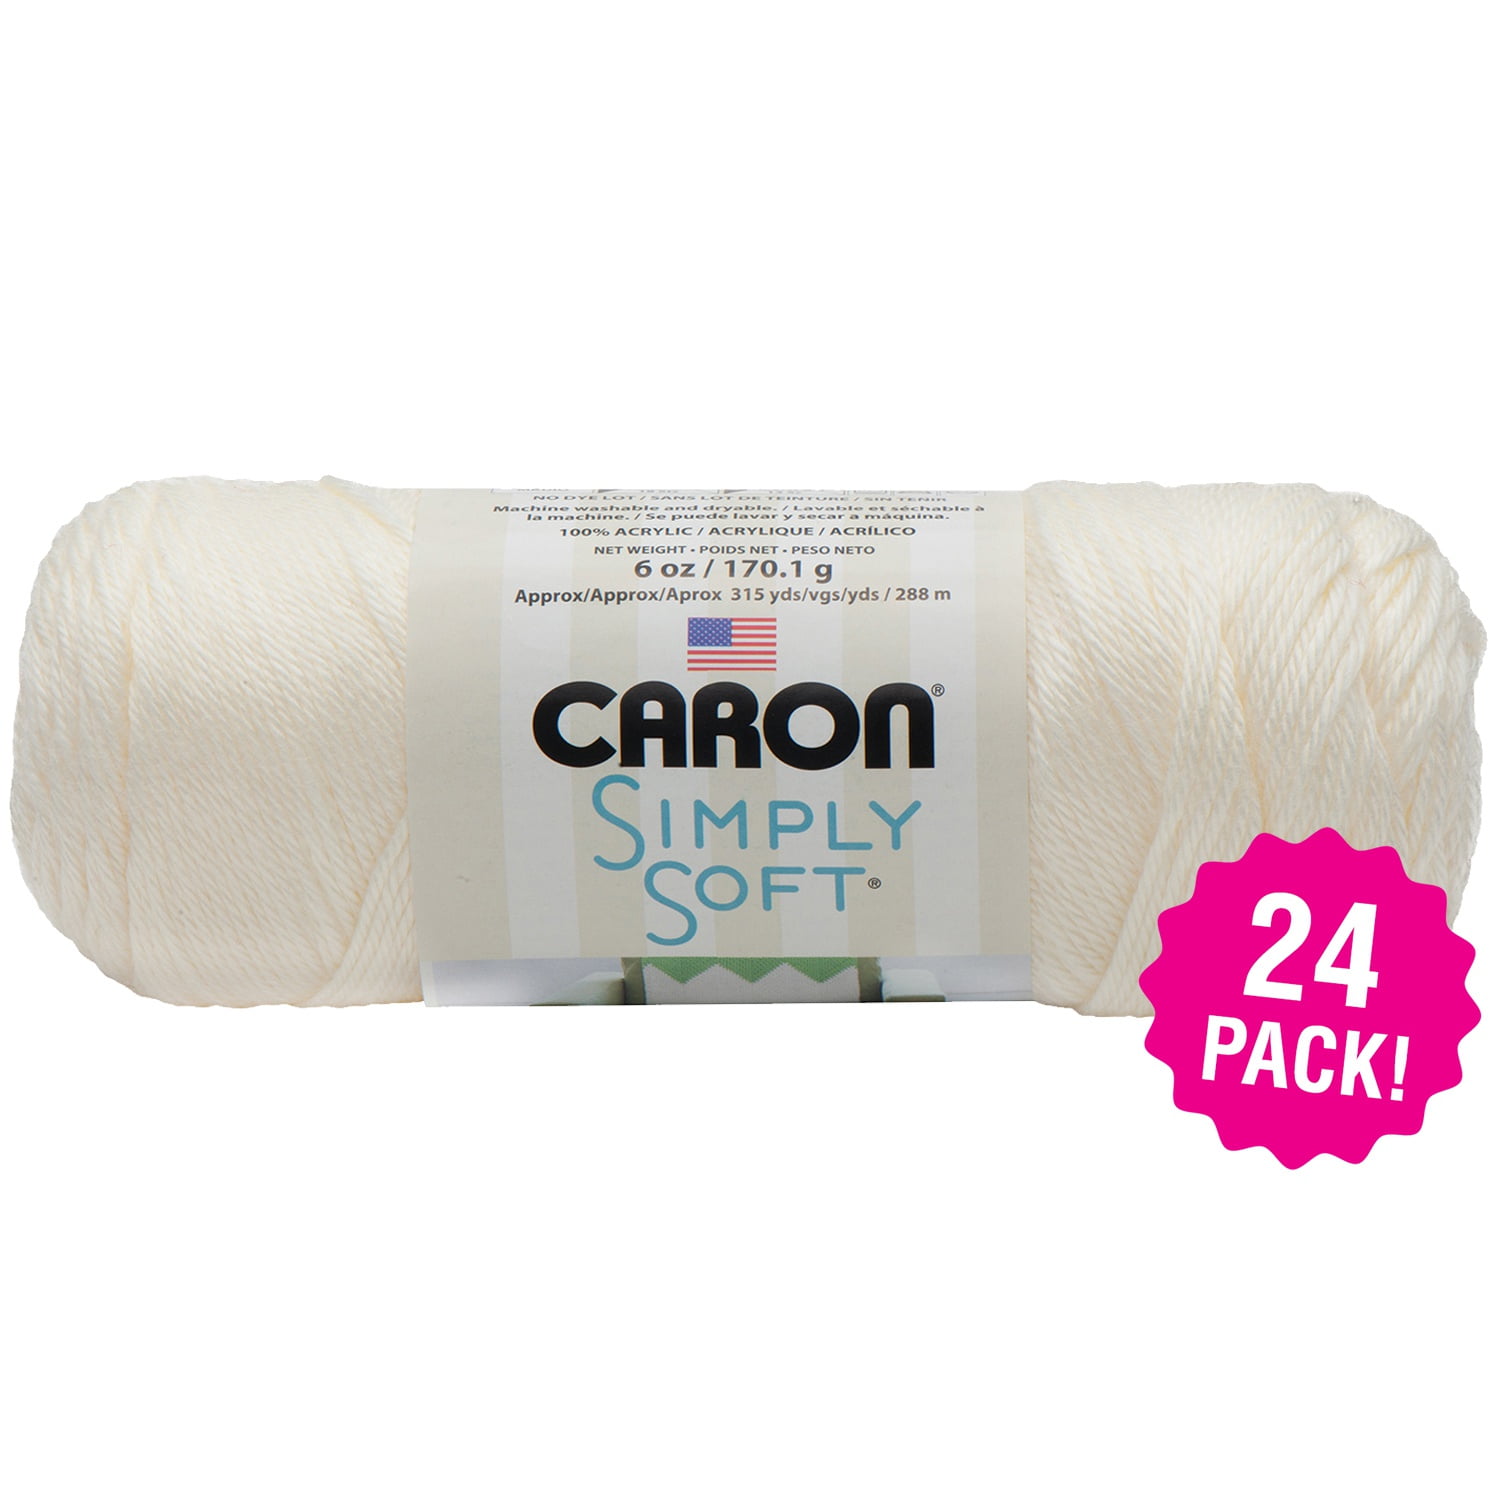 Caron Simply Soft Yarn Giveaway - Winner Picked 